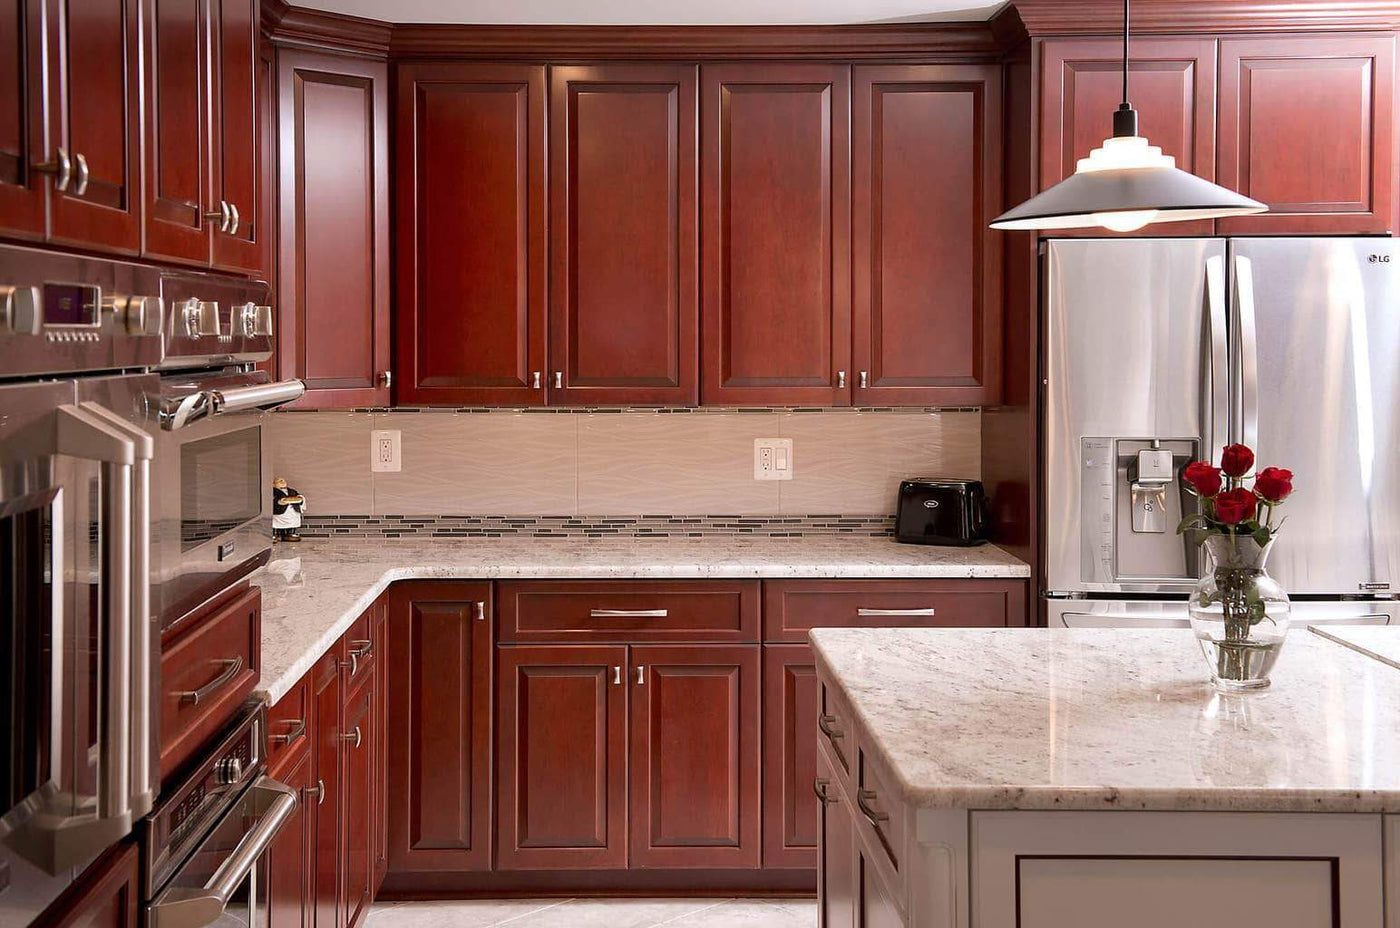 Wrap my Kitchen – Resurface your kitchen cabinet and doors